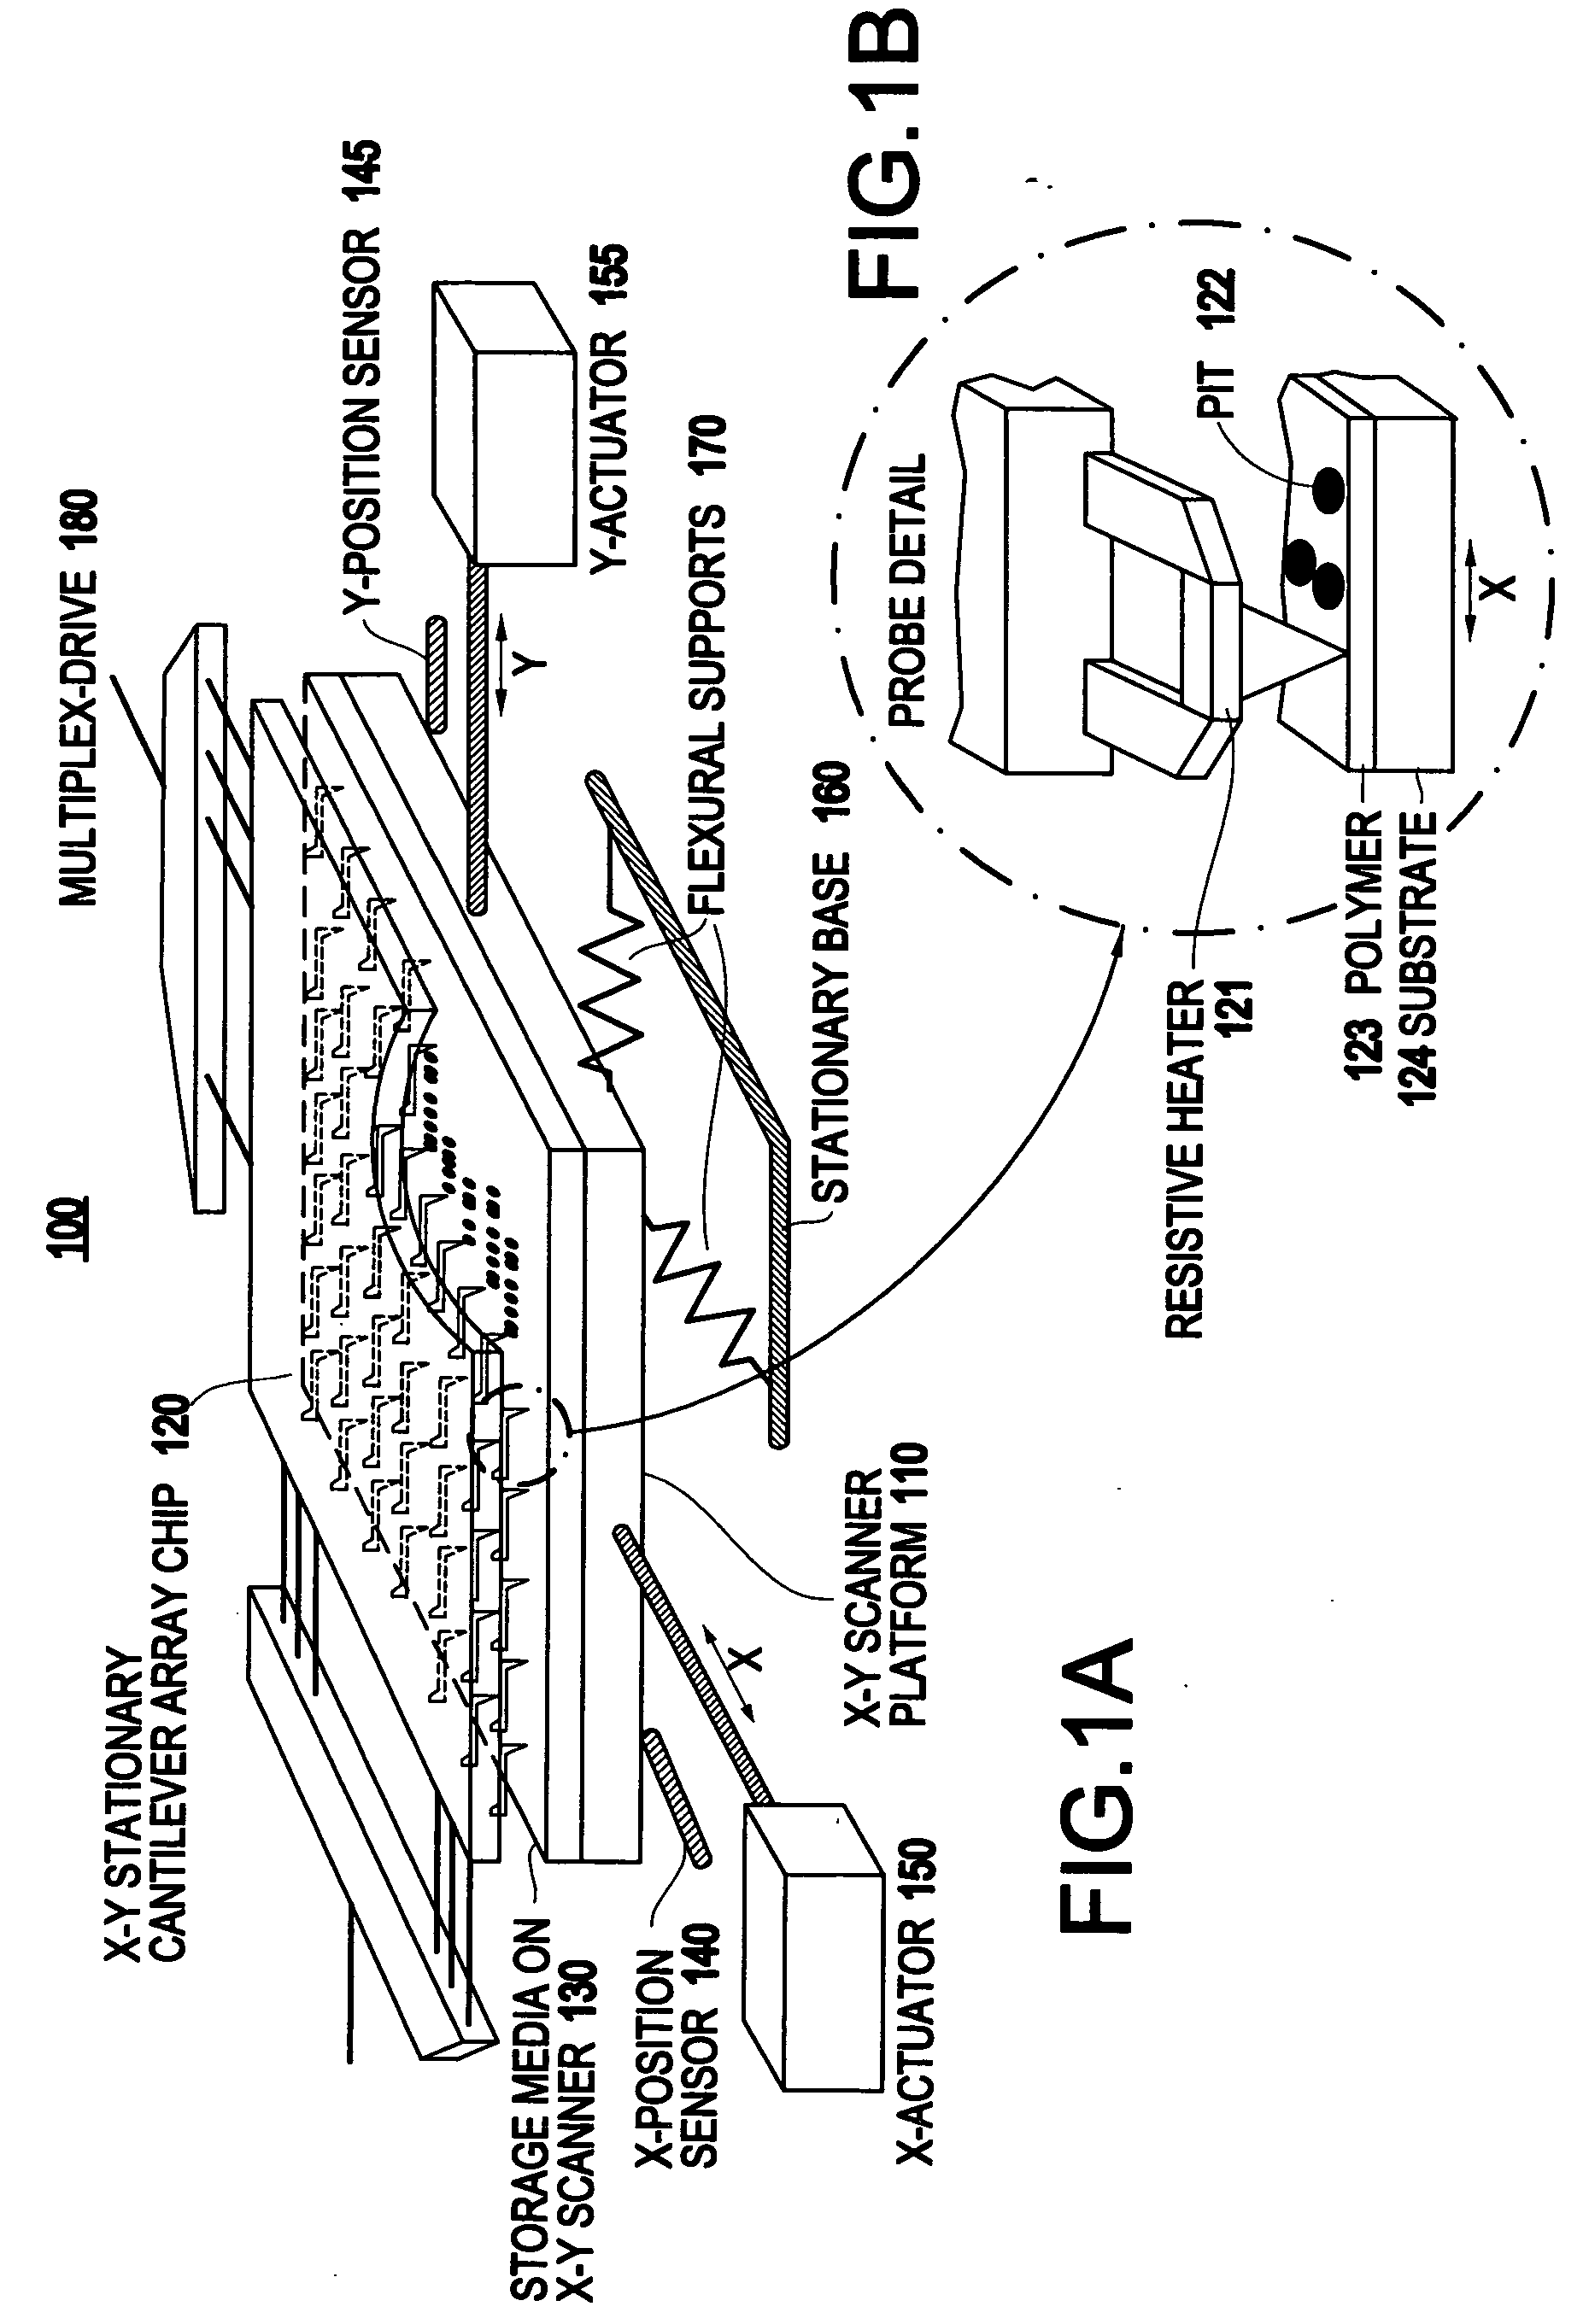 Servo system for a two-dimensional micro-electromechanical system (MEMS)-based scanner and method therefor